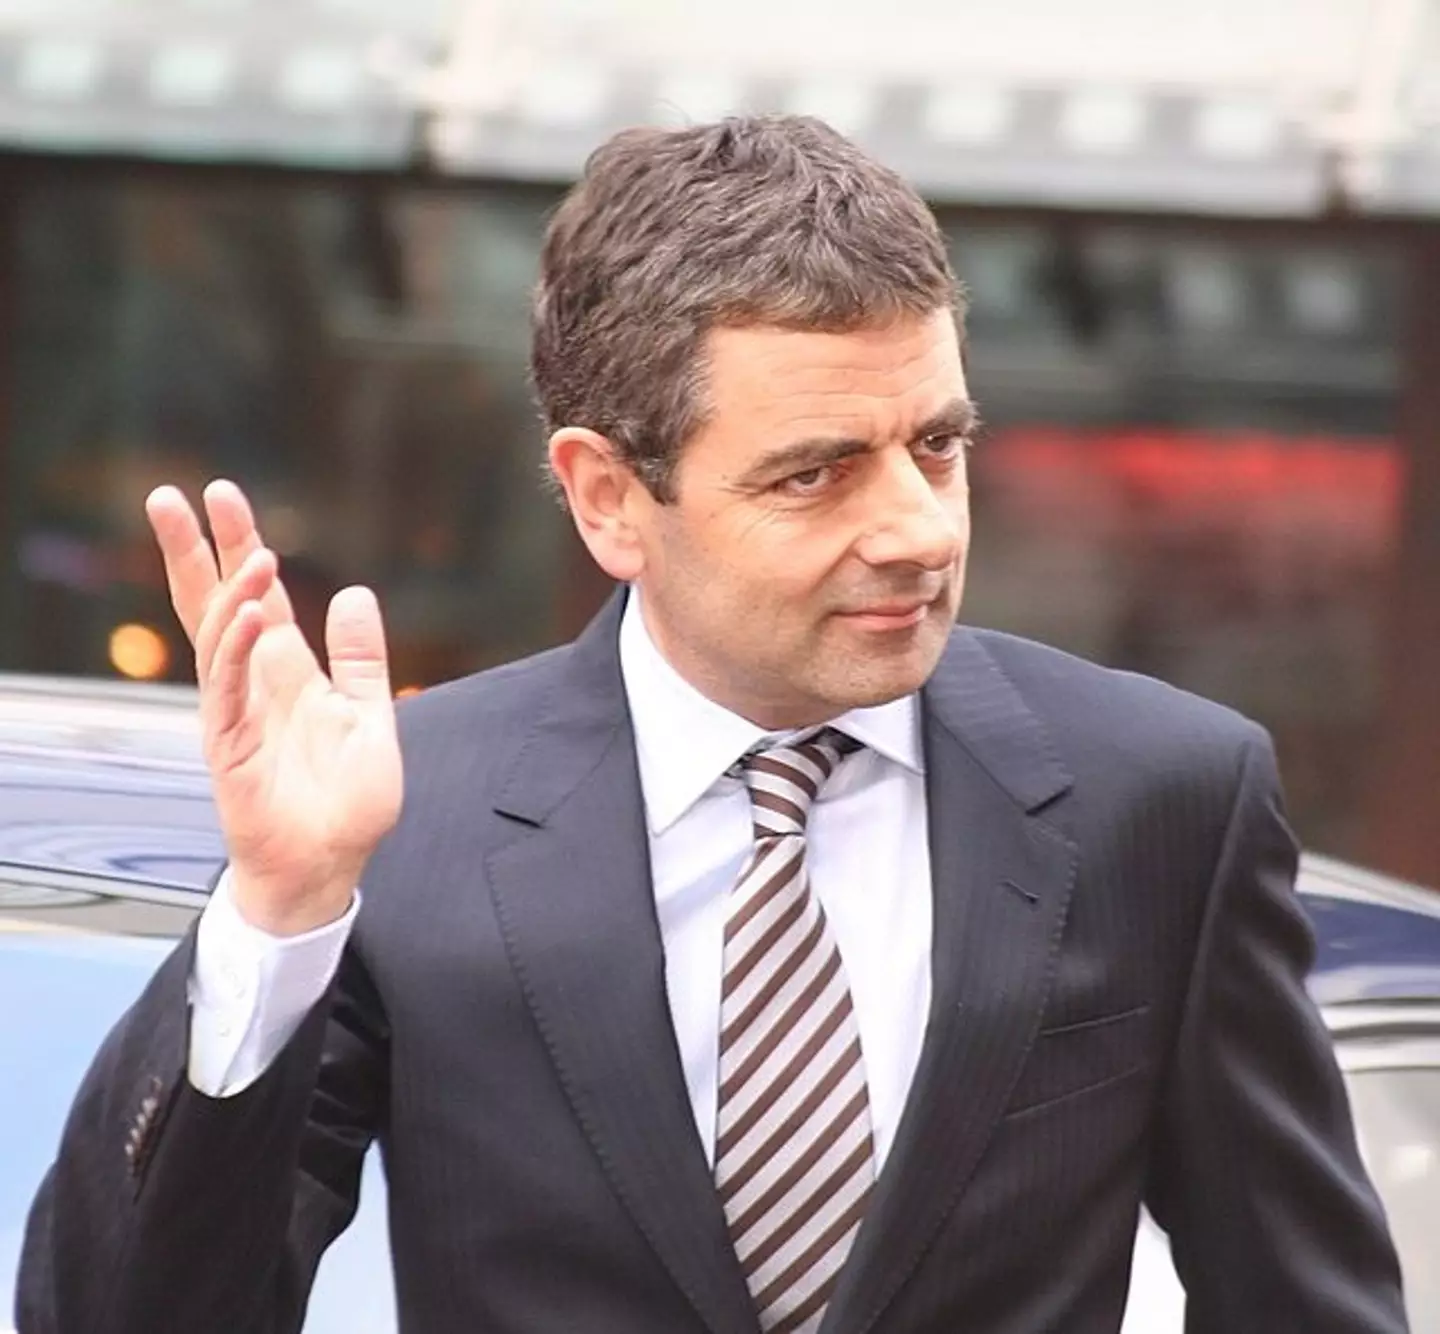 Rowan Atkinson is outspoken about his criticism of cancel culture in comedy.